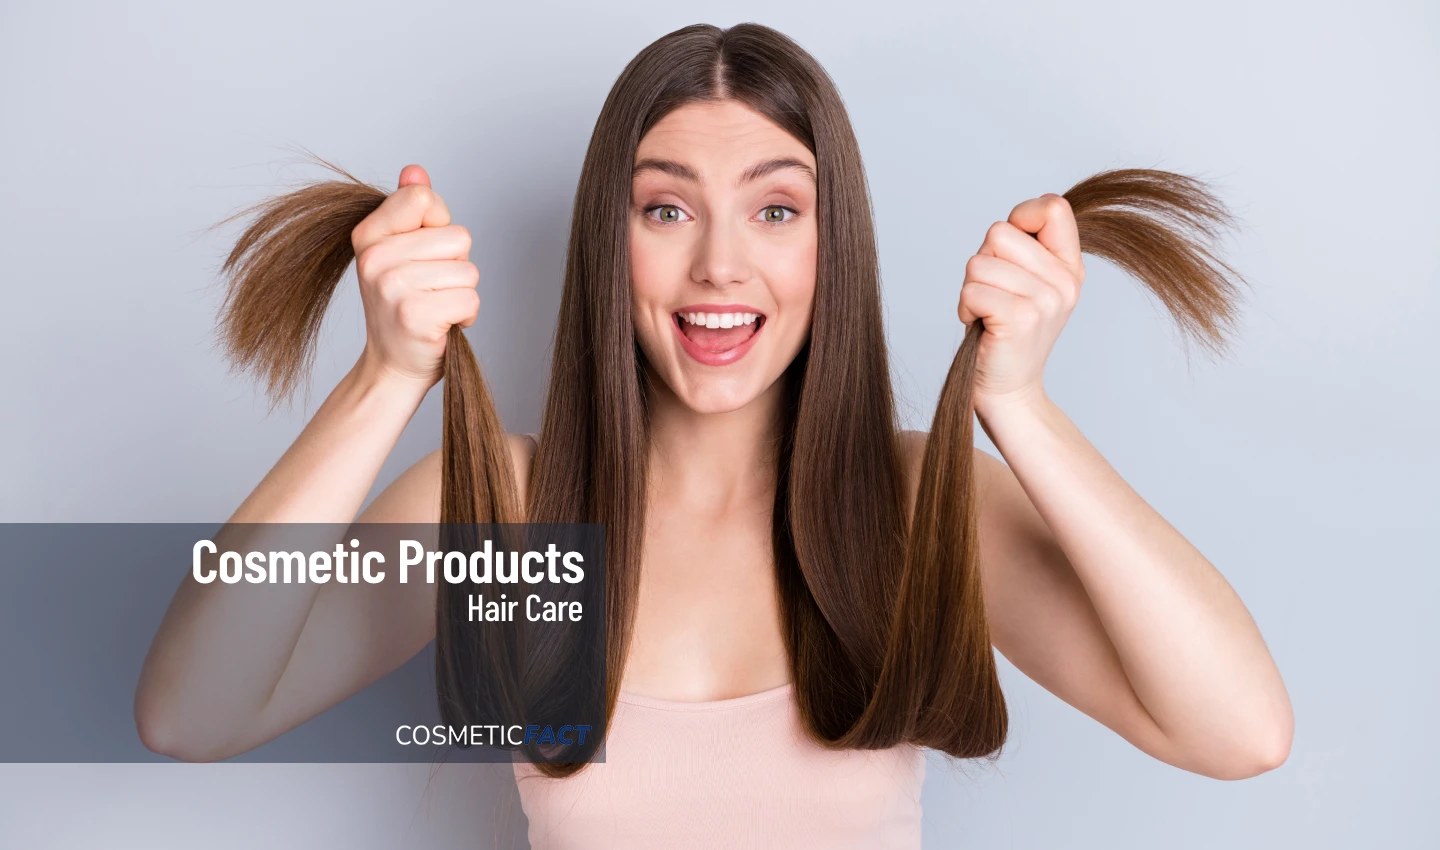 Young woman with extremely long and gorgeous hair laughing at the camera, showcasing the benefits of scalp therapy for promoting healthy hair growth.